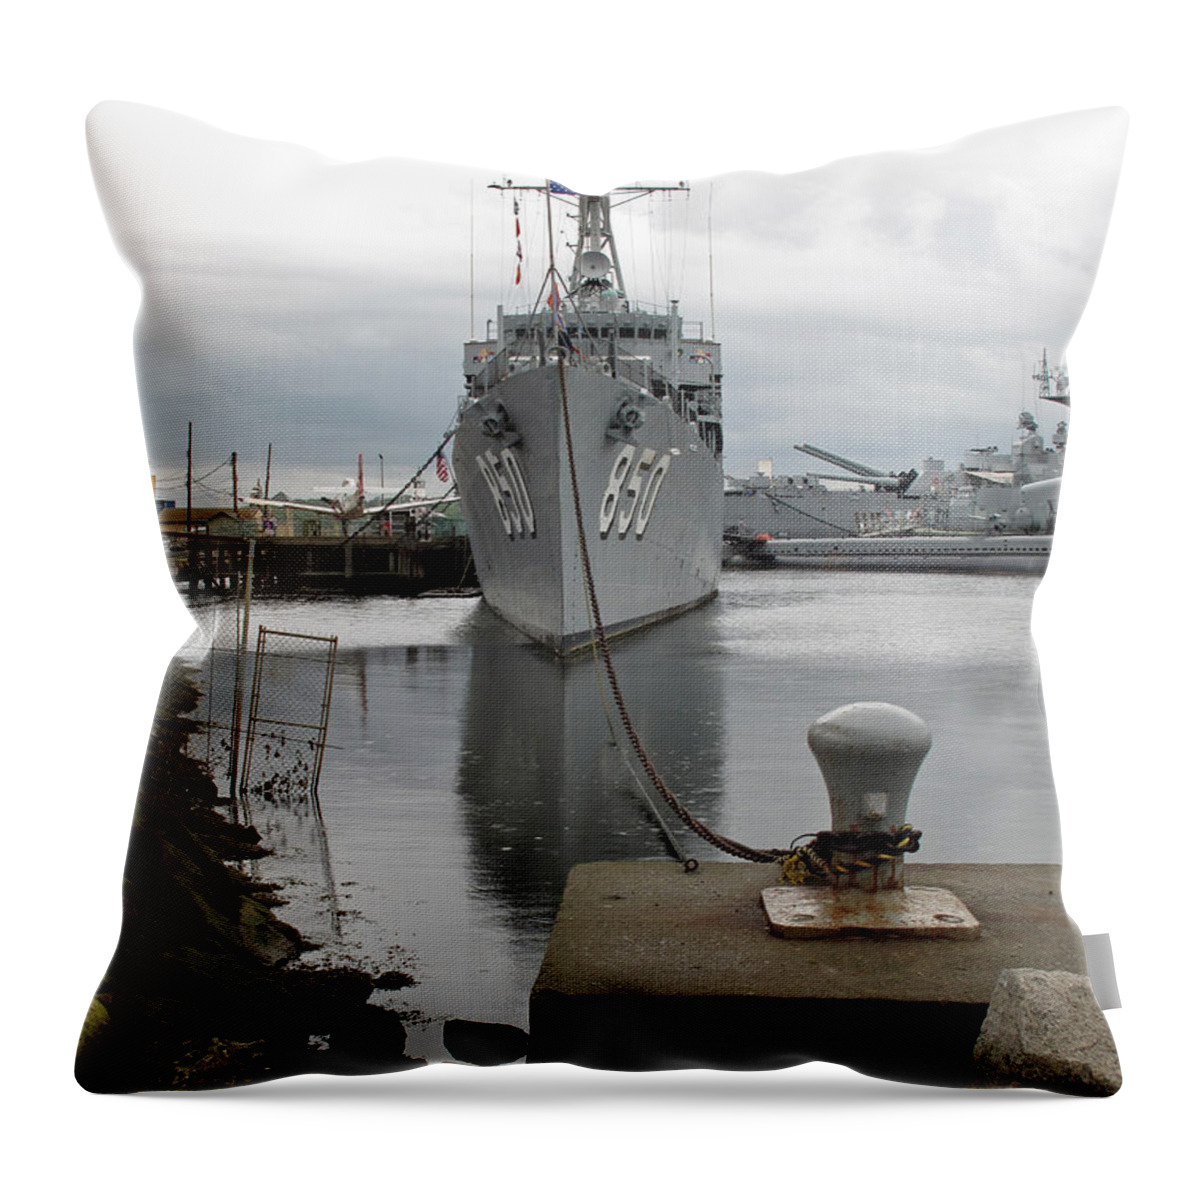 Seascape Throw Pillow featuring the photograph Joey P Mooring by Barbara McDevitt